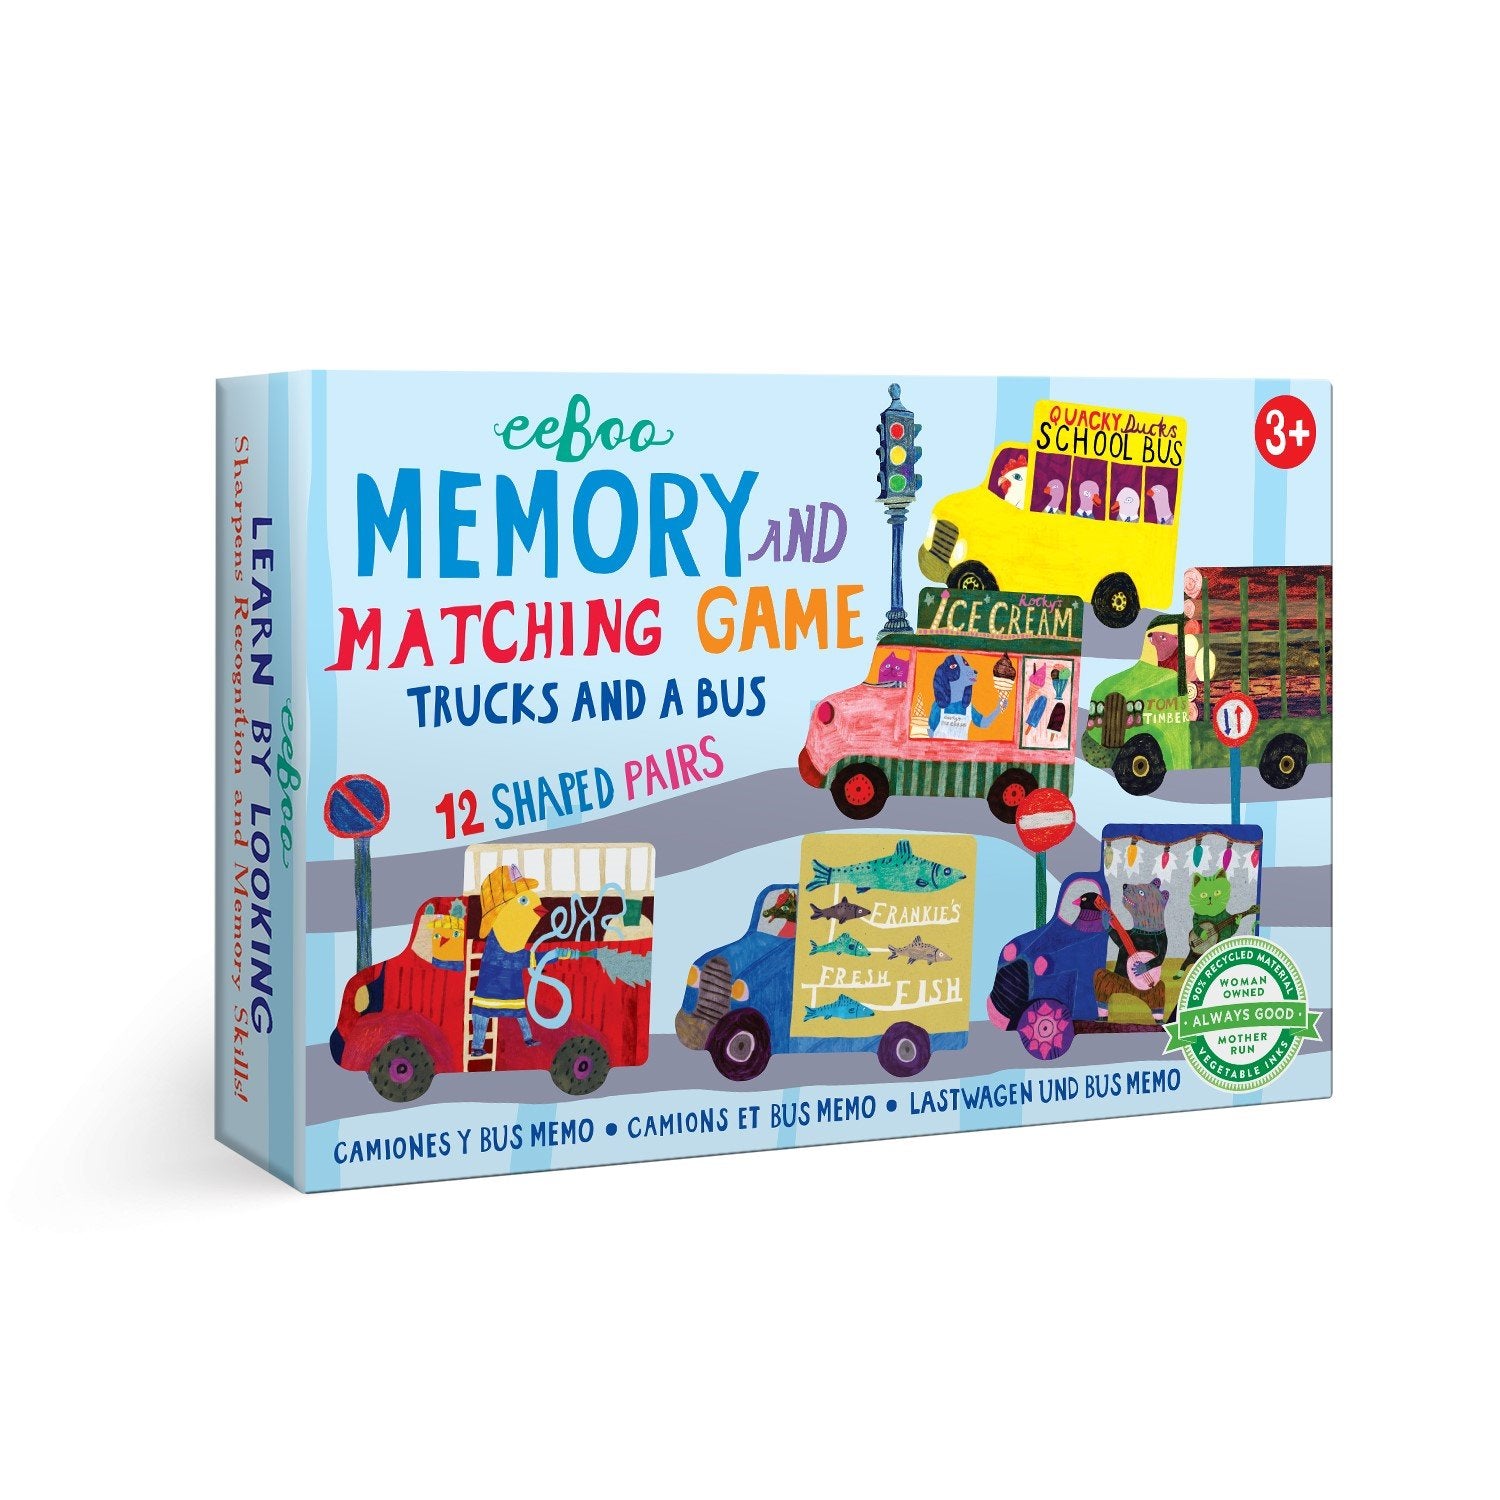 Trucks and a Bus Memory & Matching Game